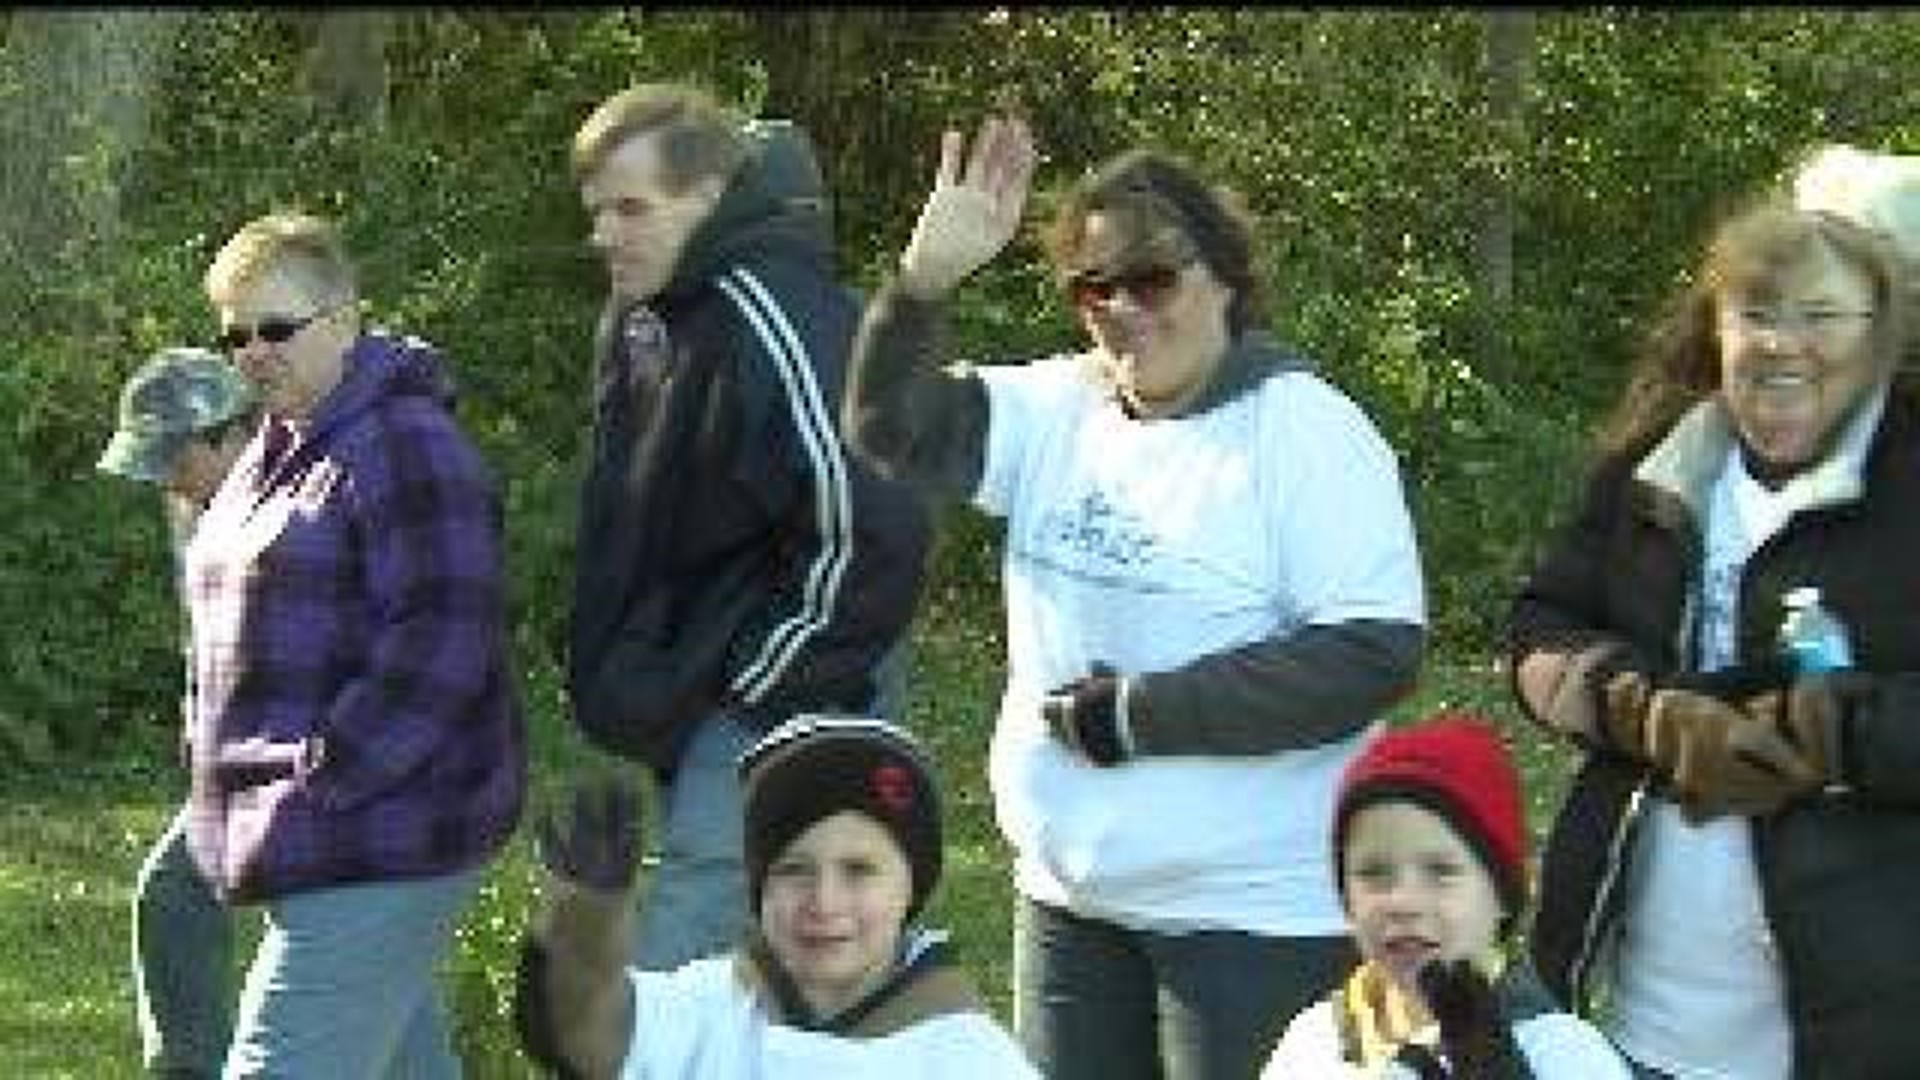 Walk Raises Money For Those With Down Syndrome